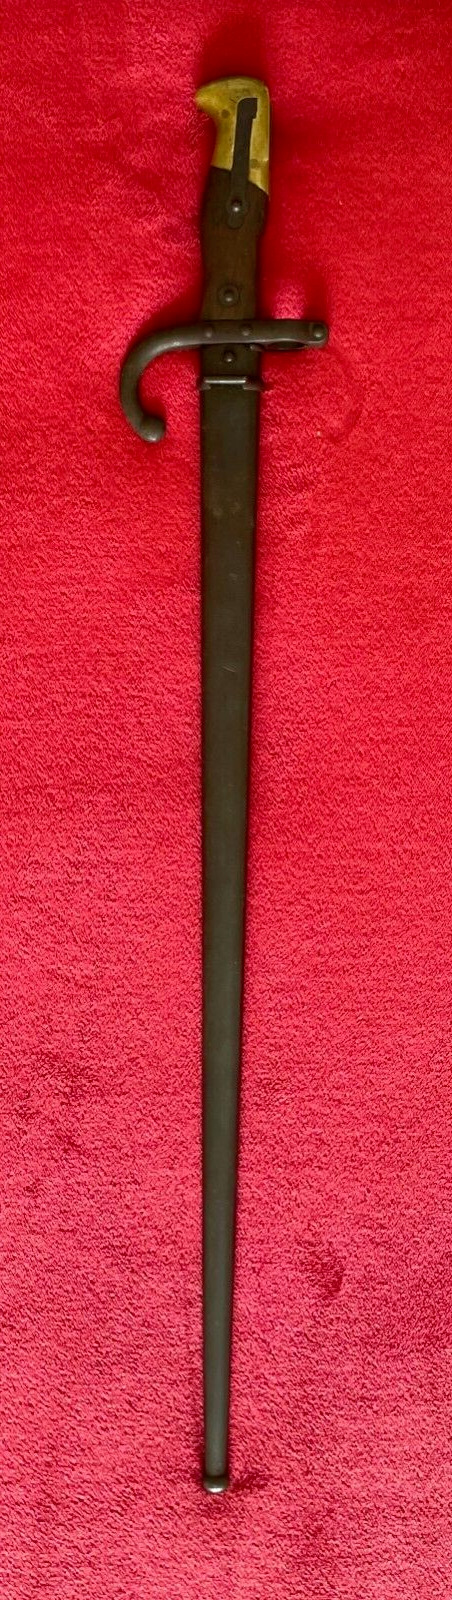 1874 GRAS BAYONET & SCABBARD - L. DENY PARIS FRANCE - SERIAL NUMBERS 507 MATCH